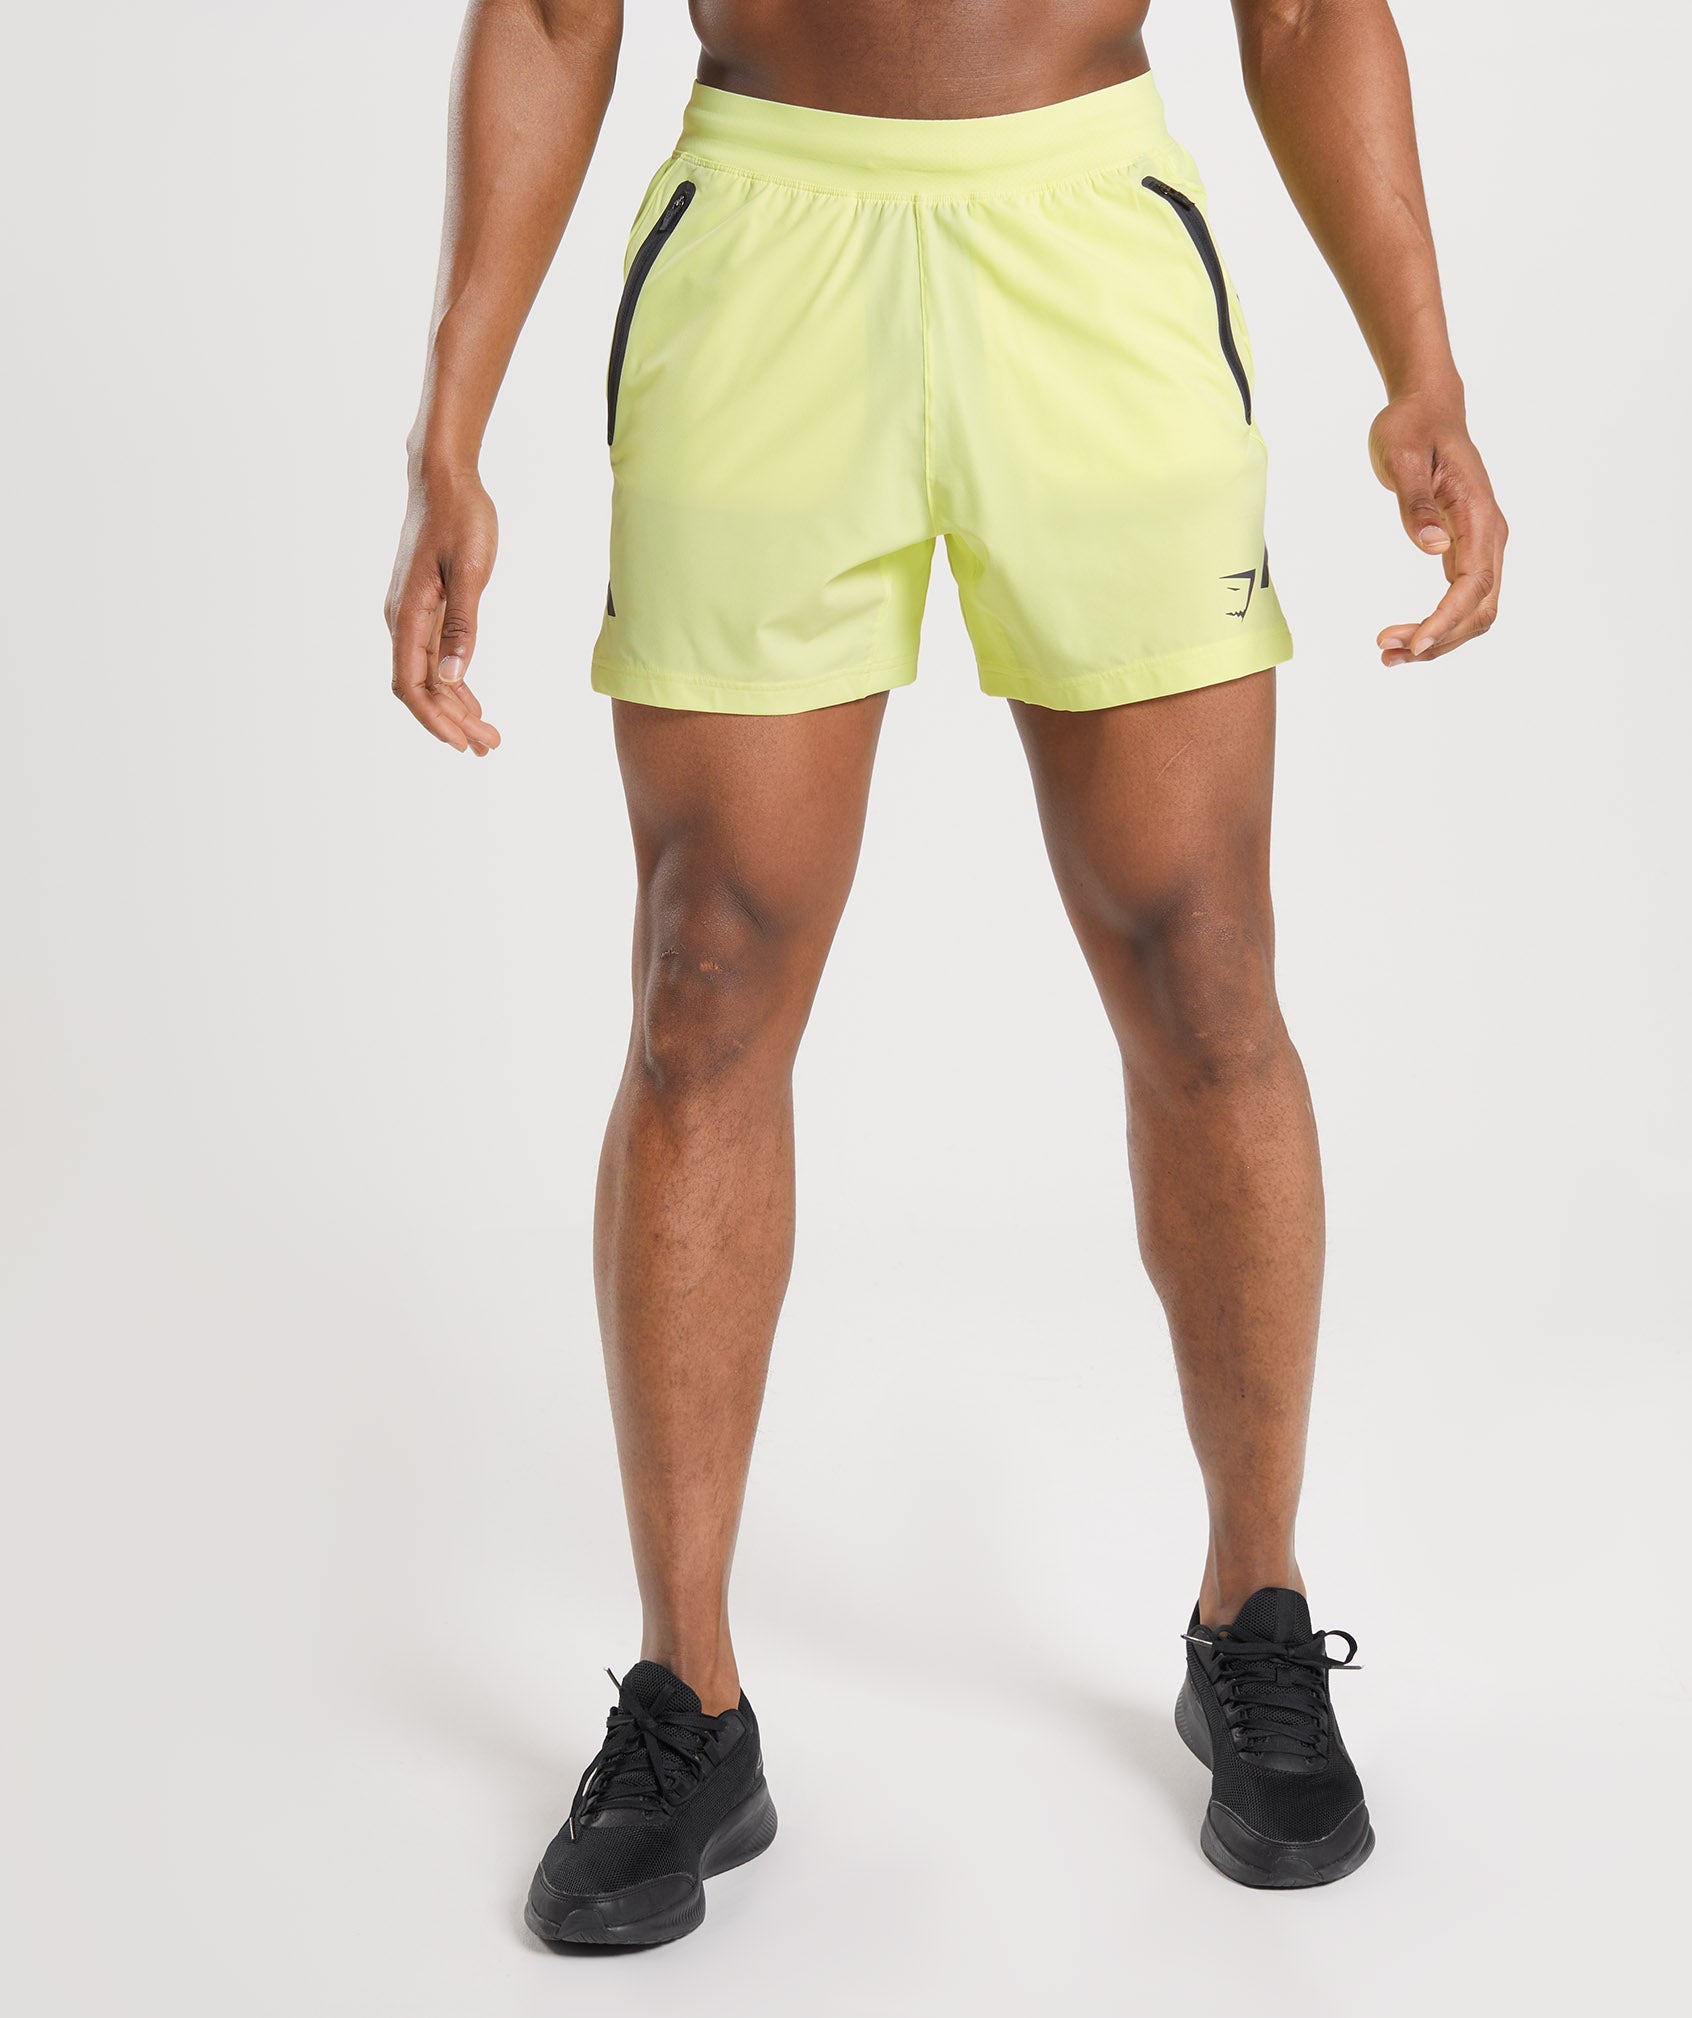 Apex 5" Perform Shorts in Firefly Green - view 1